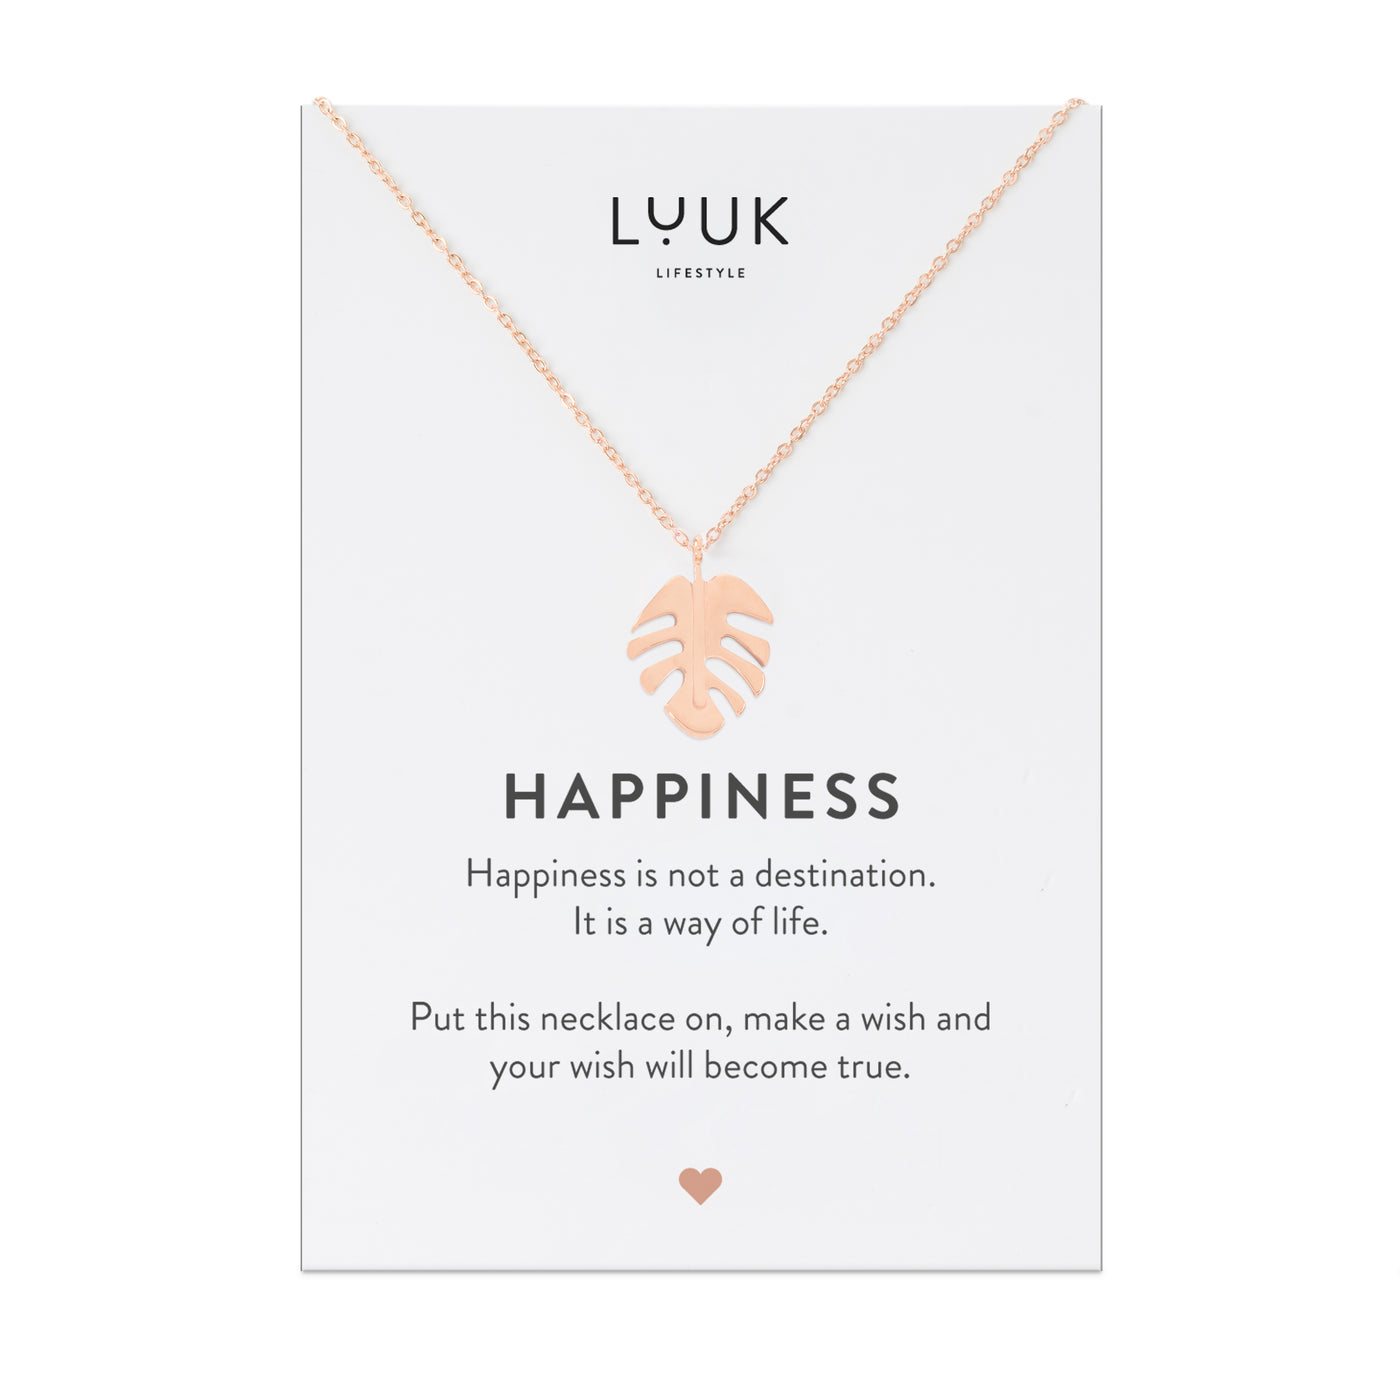 Necklace with Monstera Leaf leaf pendant and Happiness greeting card